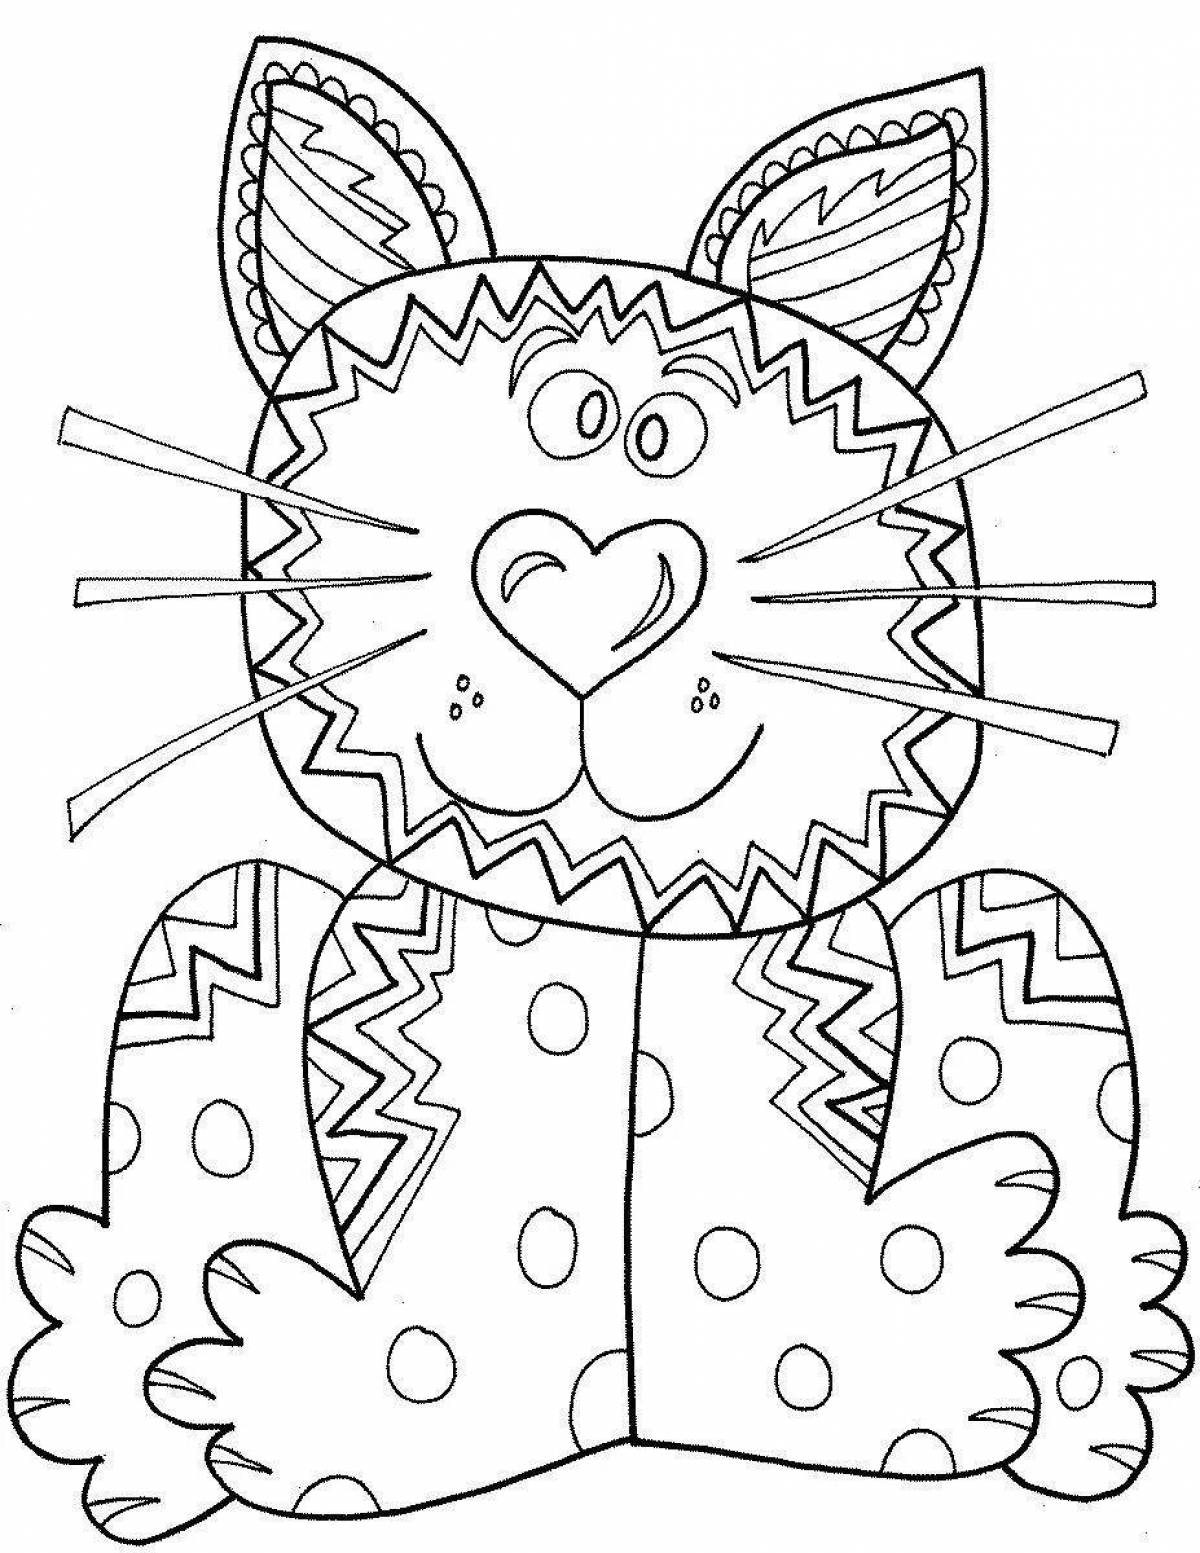 Bright anti-stress light large coloring page